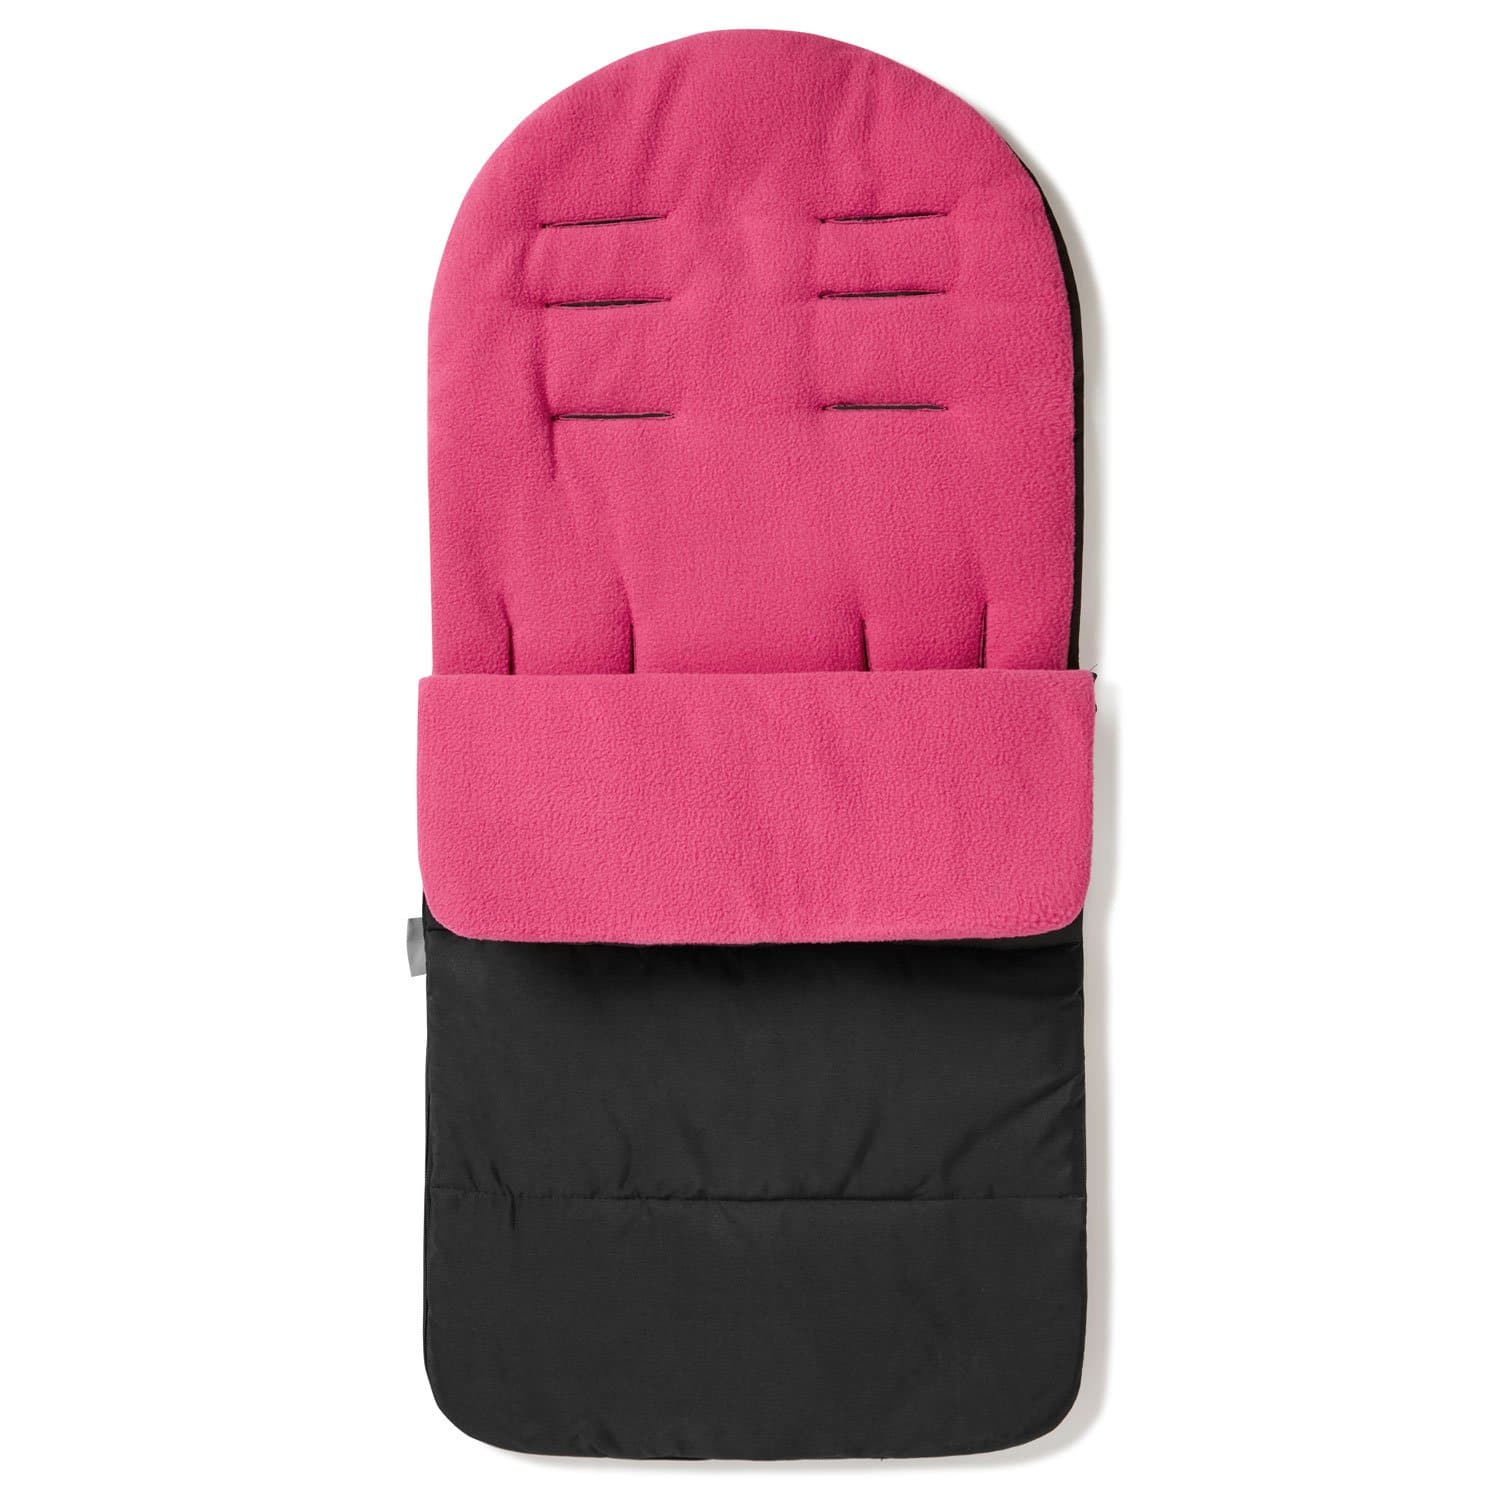 Premium Footmuff / Cosy Toes Compatible with Combi - Pink Rose / Fits All Models | For Your Little One